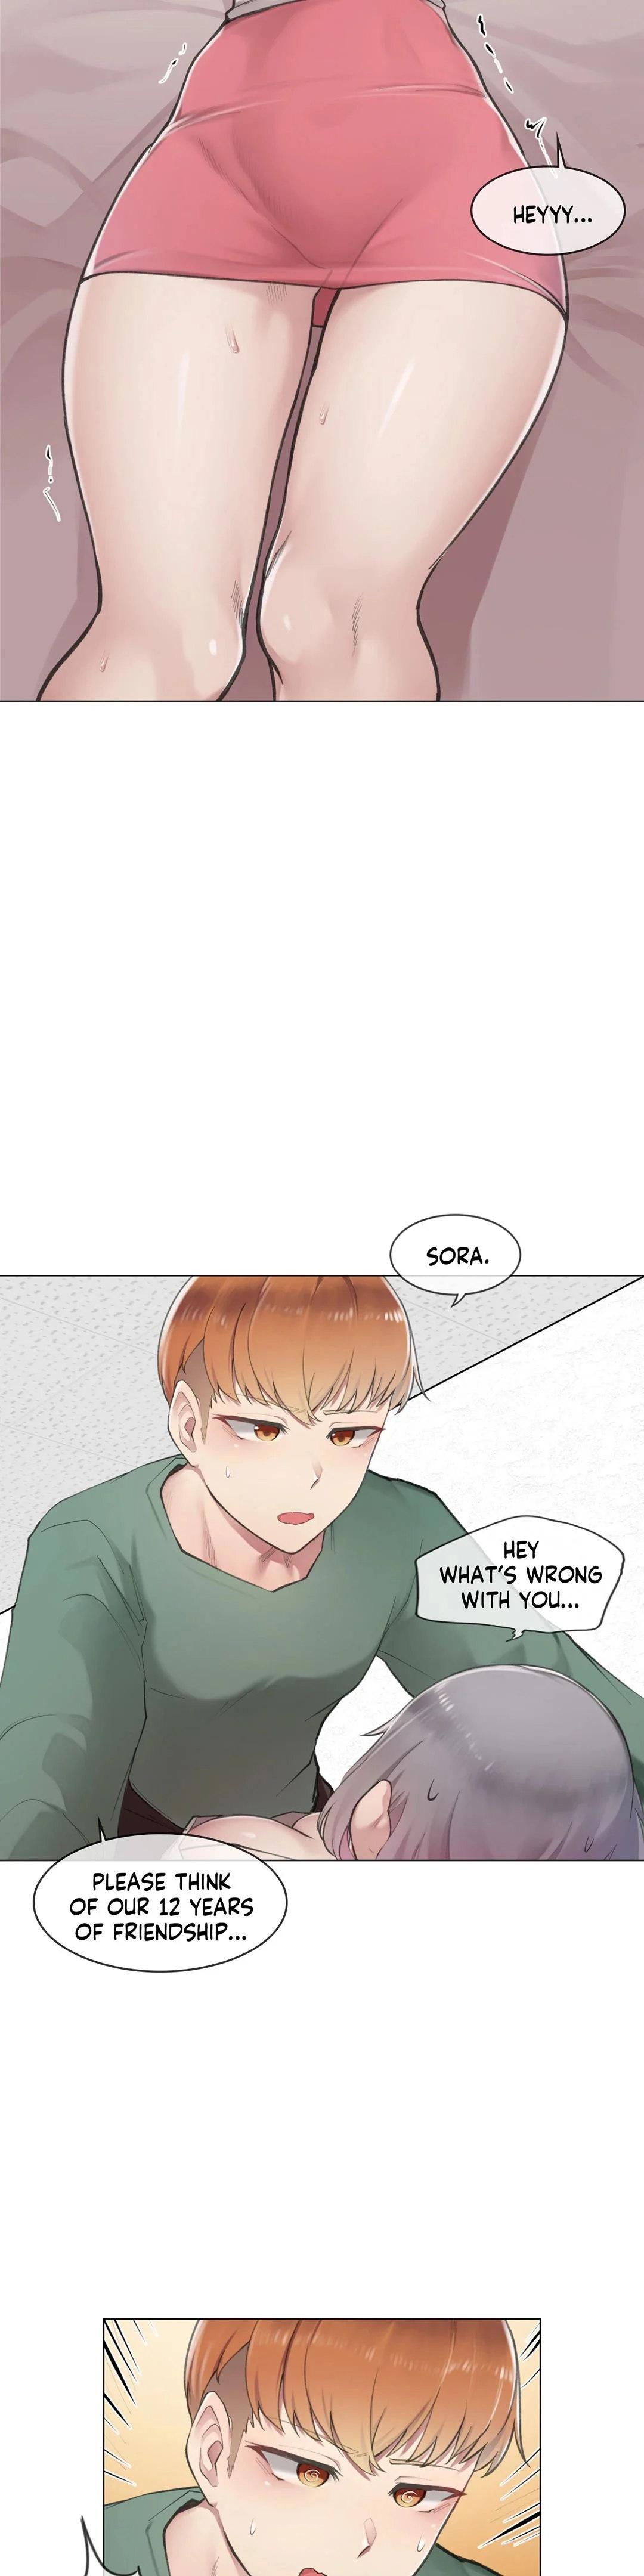 [Dumangoon, KONG_] Sexcape Room: Snap Off Ch.7/7 [English] [Manhwa PDF] Completed 23